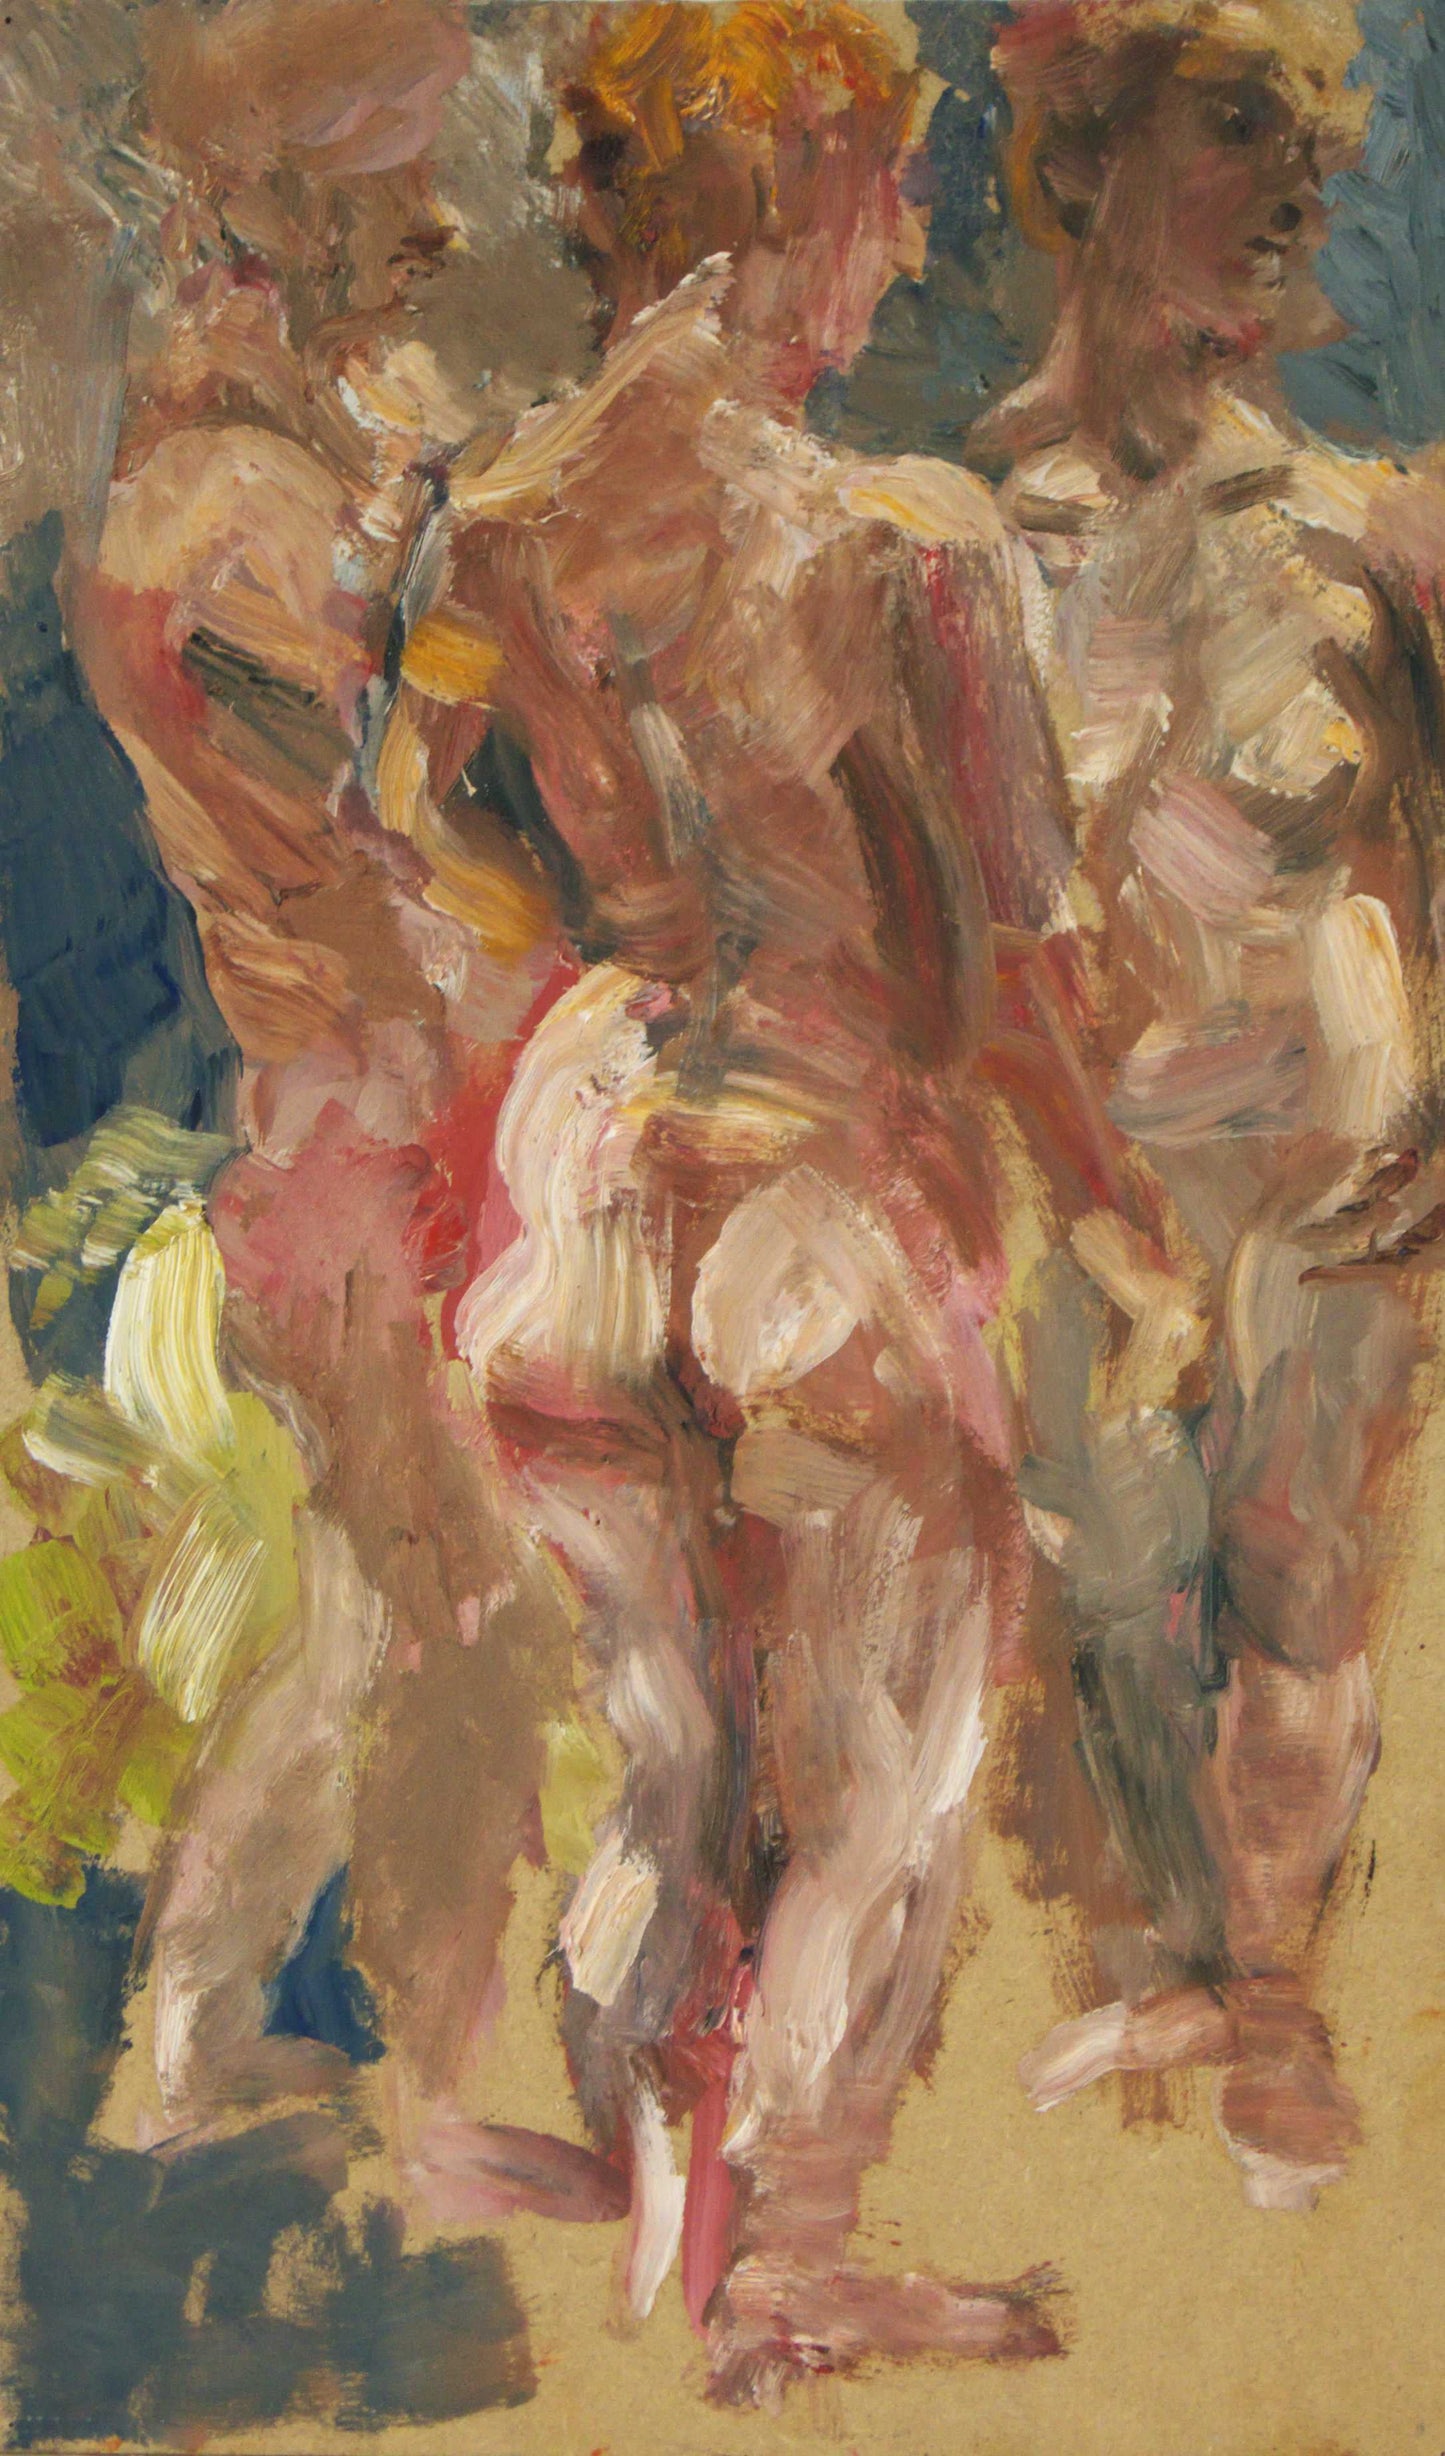 ‘Two standing figures’ 2007 oil on plywood 61x20cm